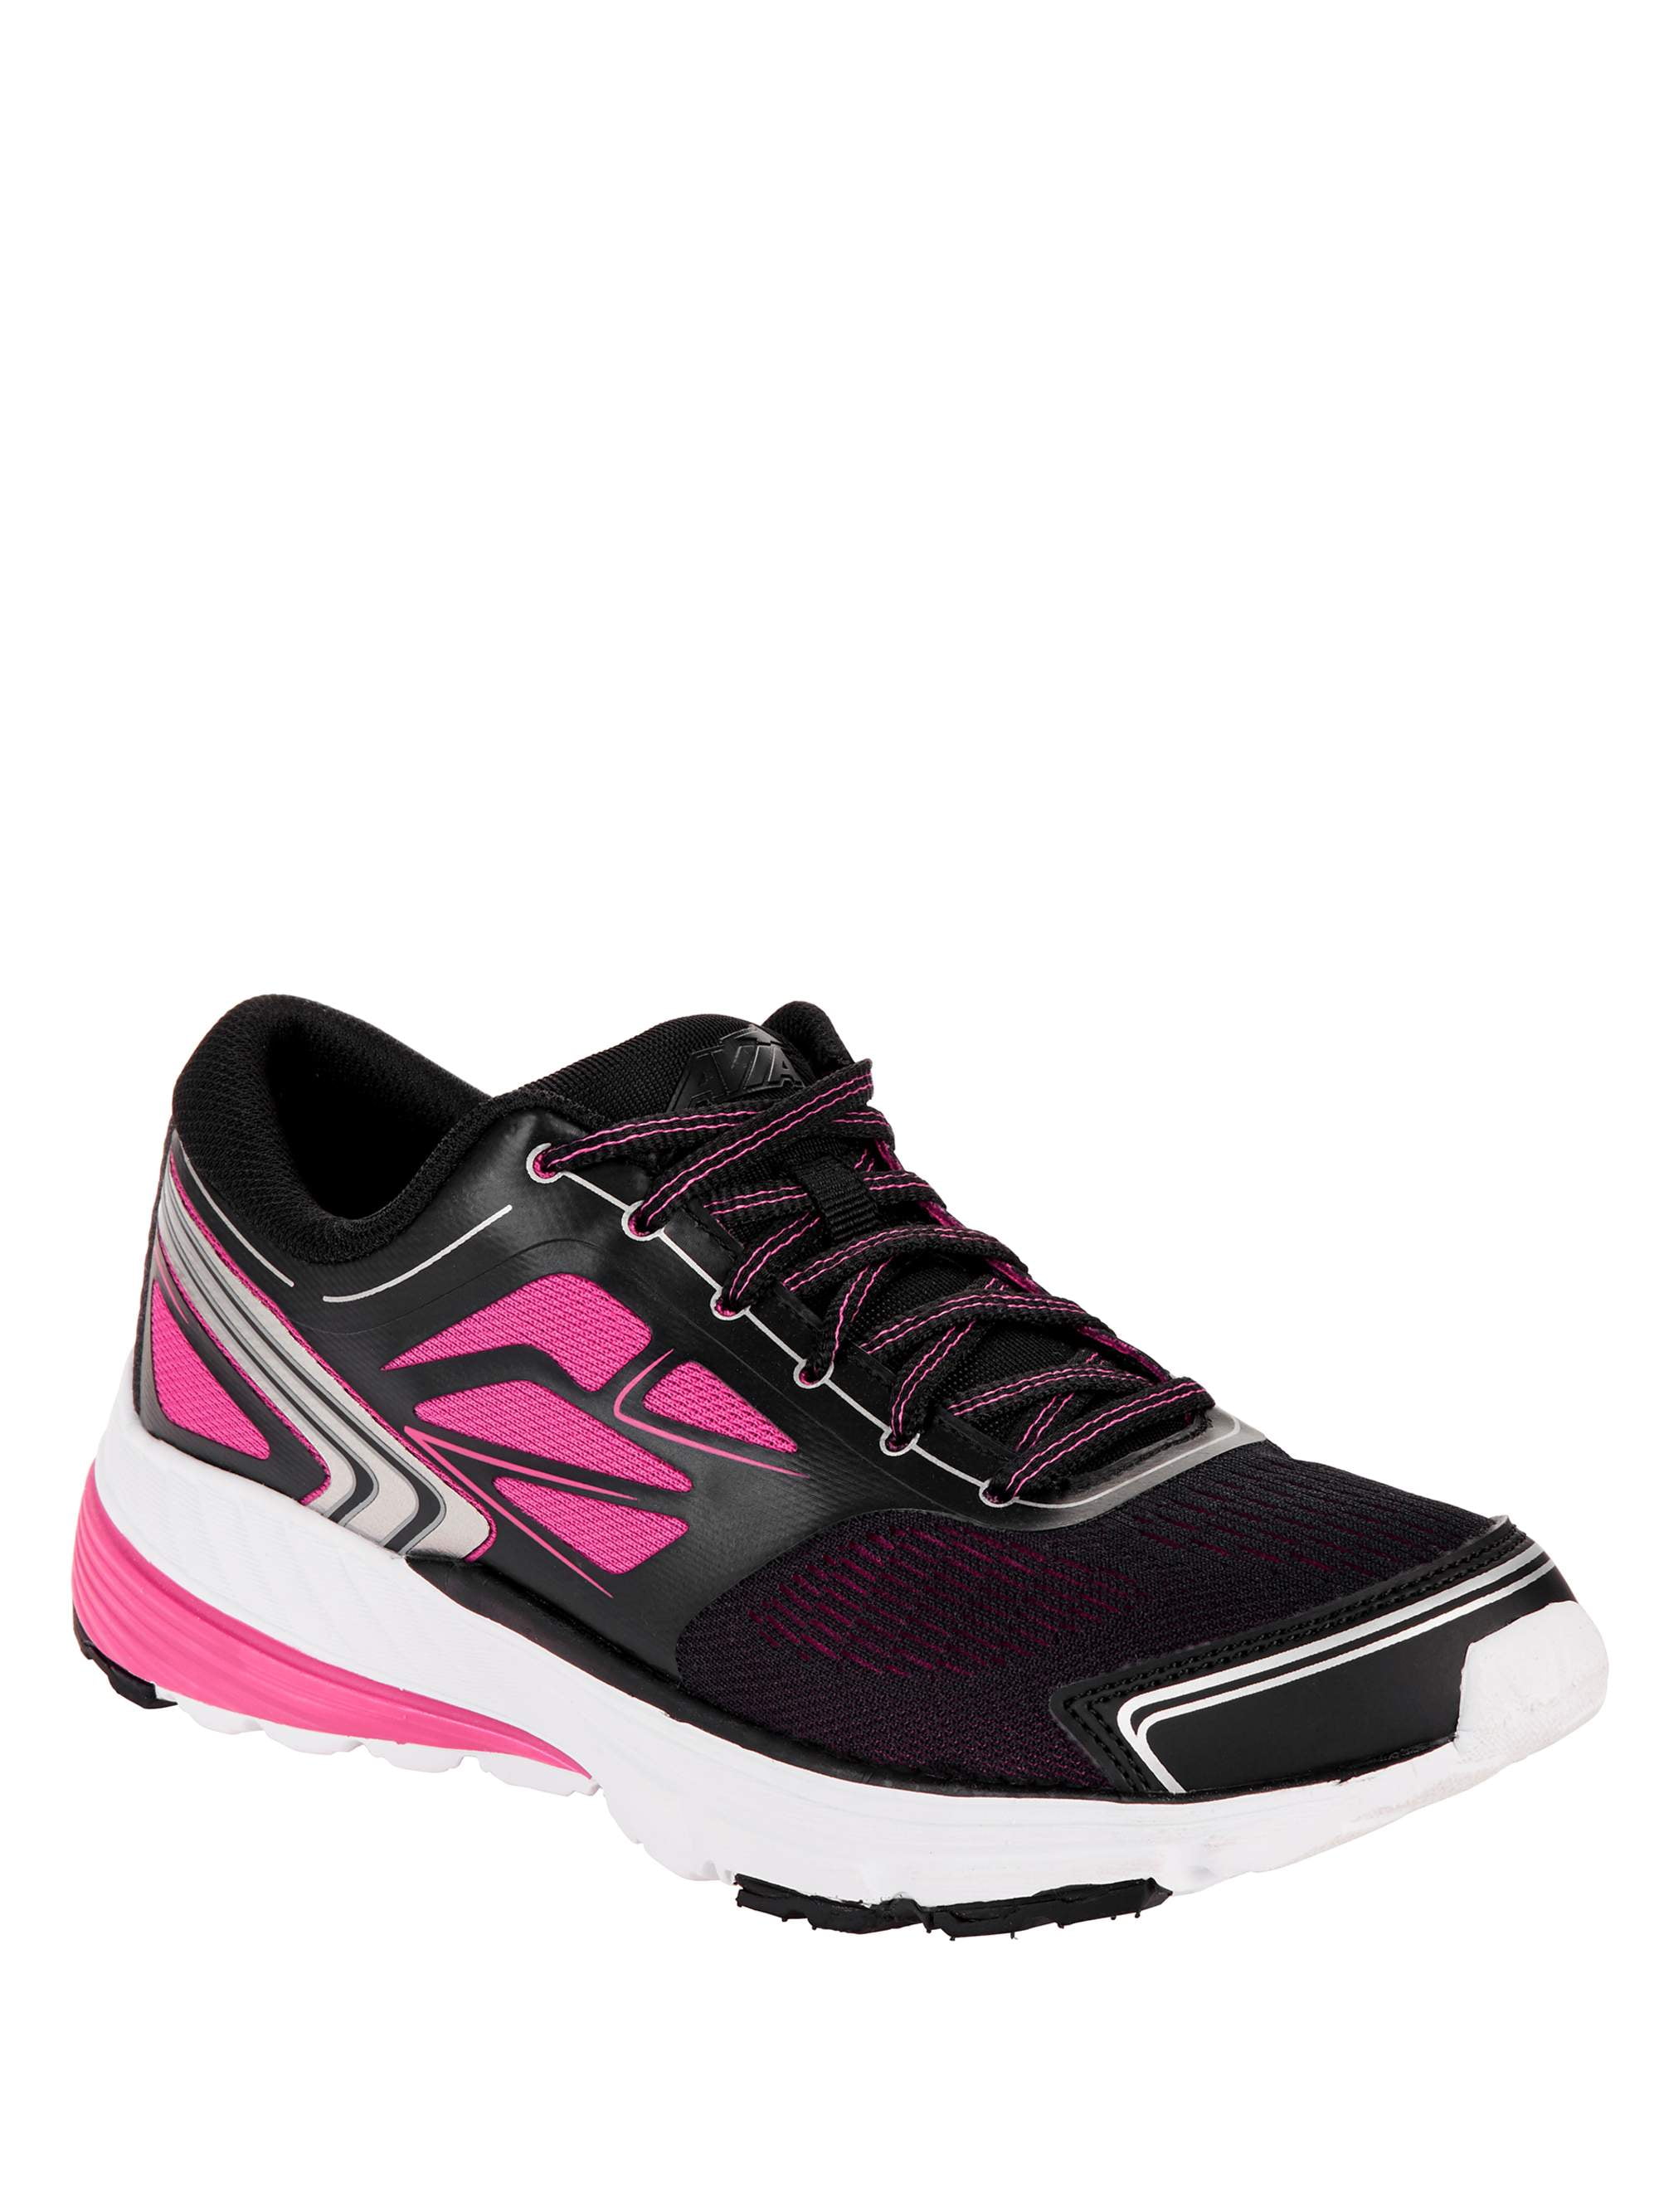 8.5 BLACK/PINK LADIES "ARCH SUPPORT" LIGHTWEIGHT SHOES AVIA-WOMEN 6 6.5 7.5 